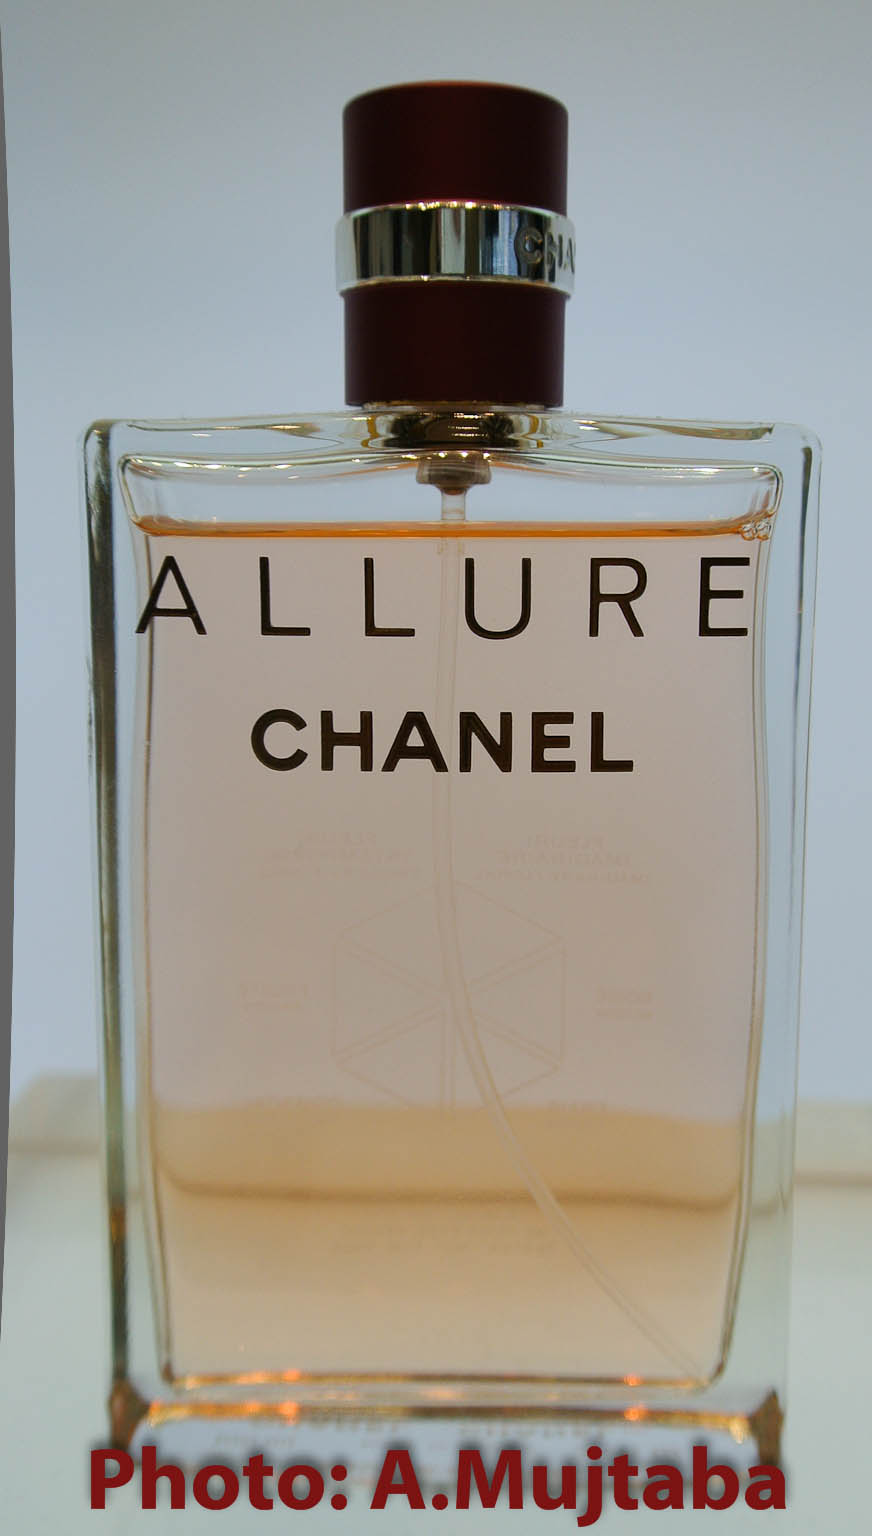 Chanel Allure – SCENTS OF SELF